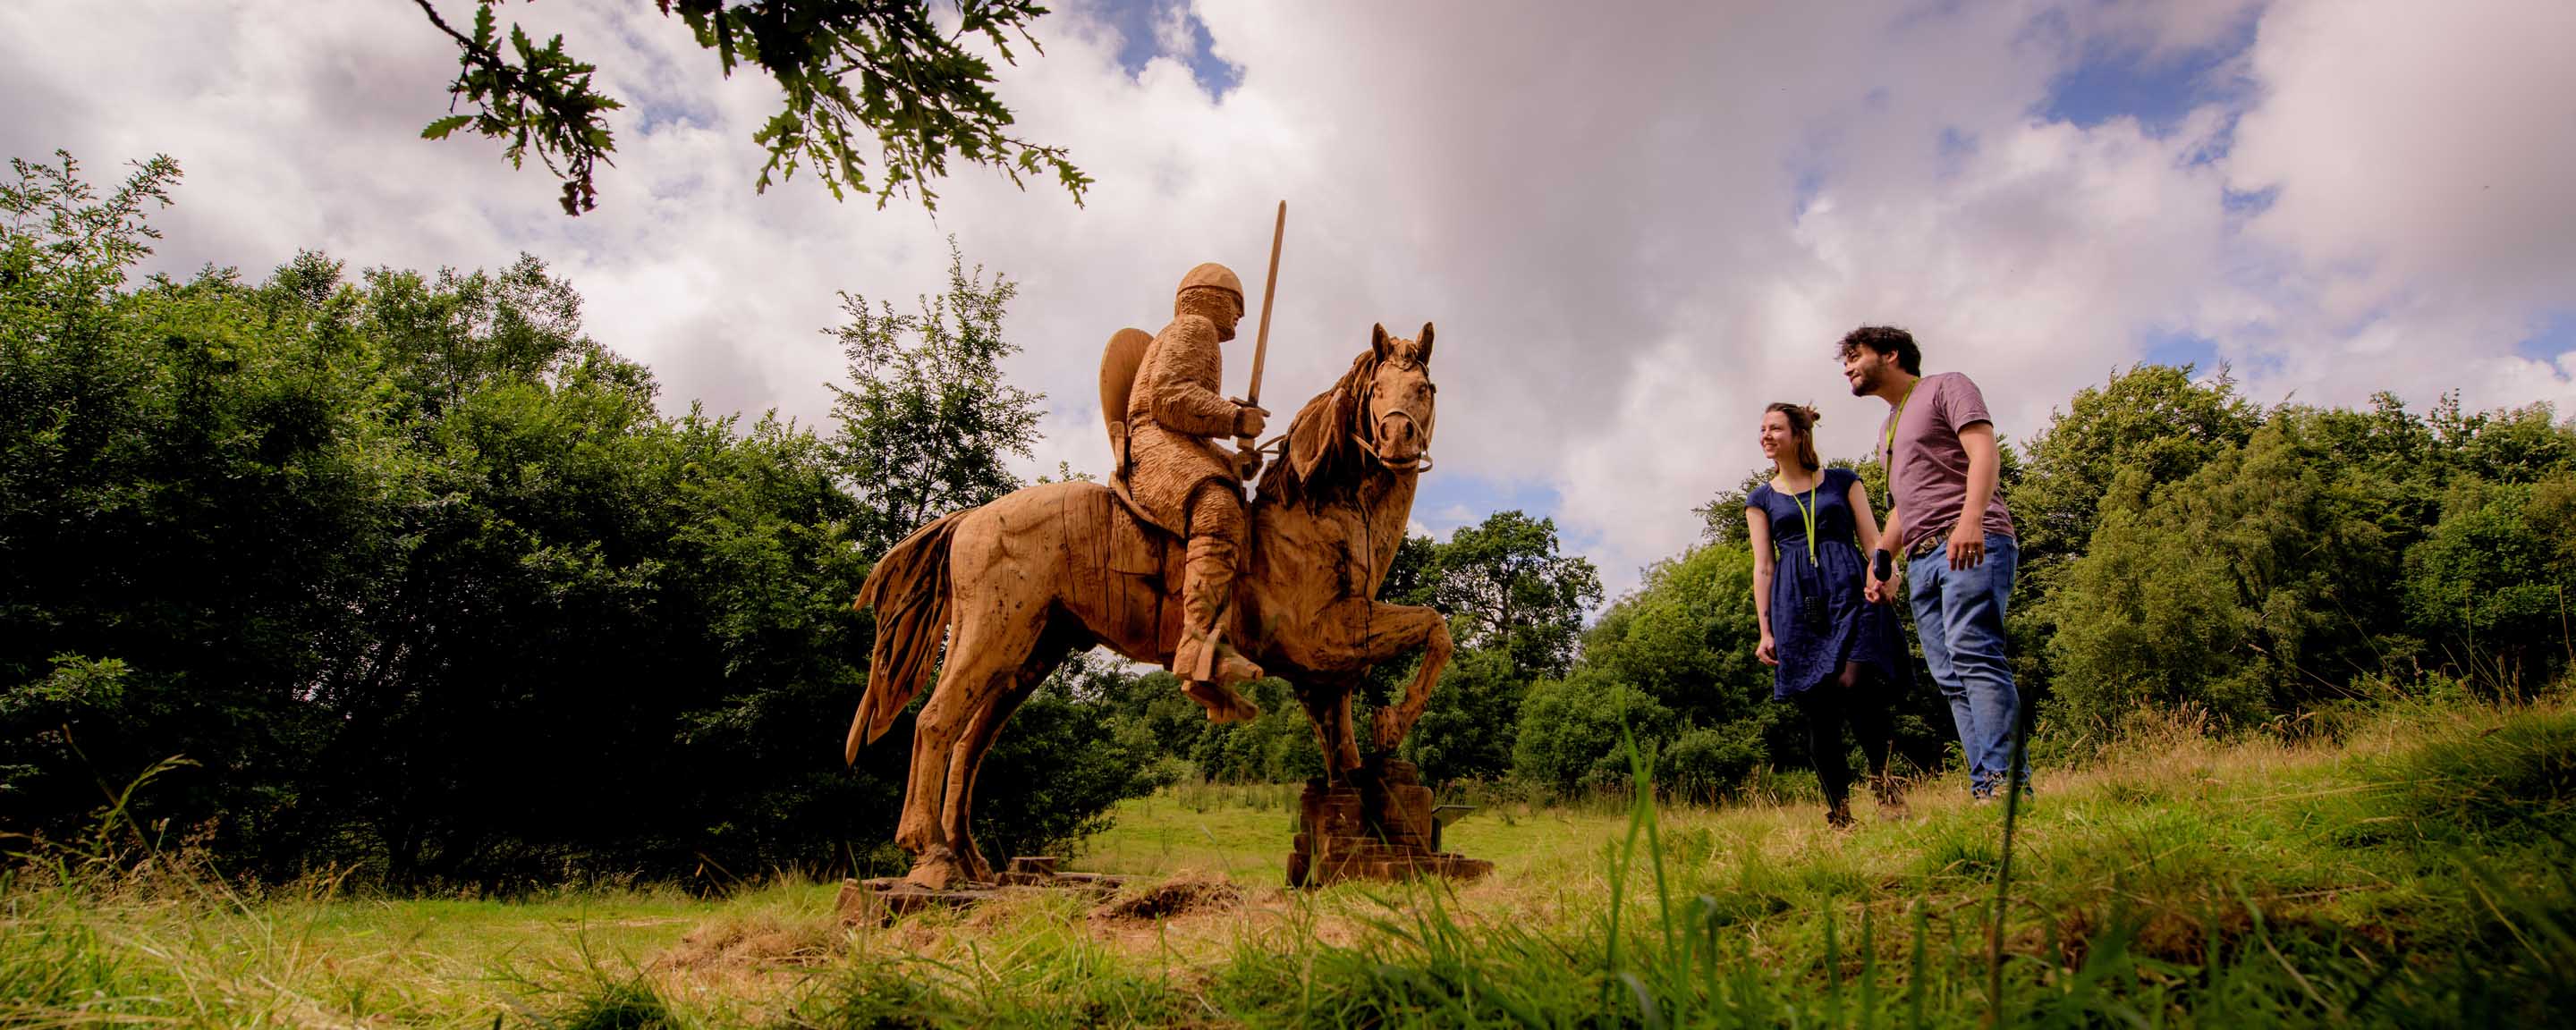 Wooden horse and knight in field